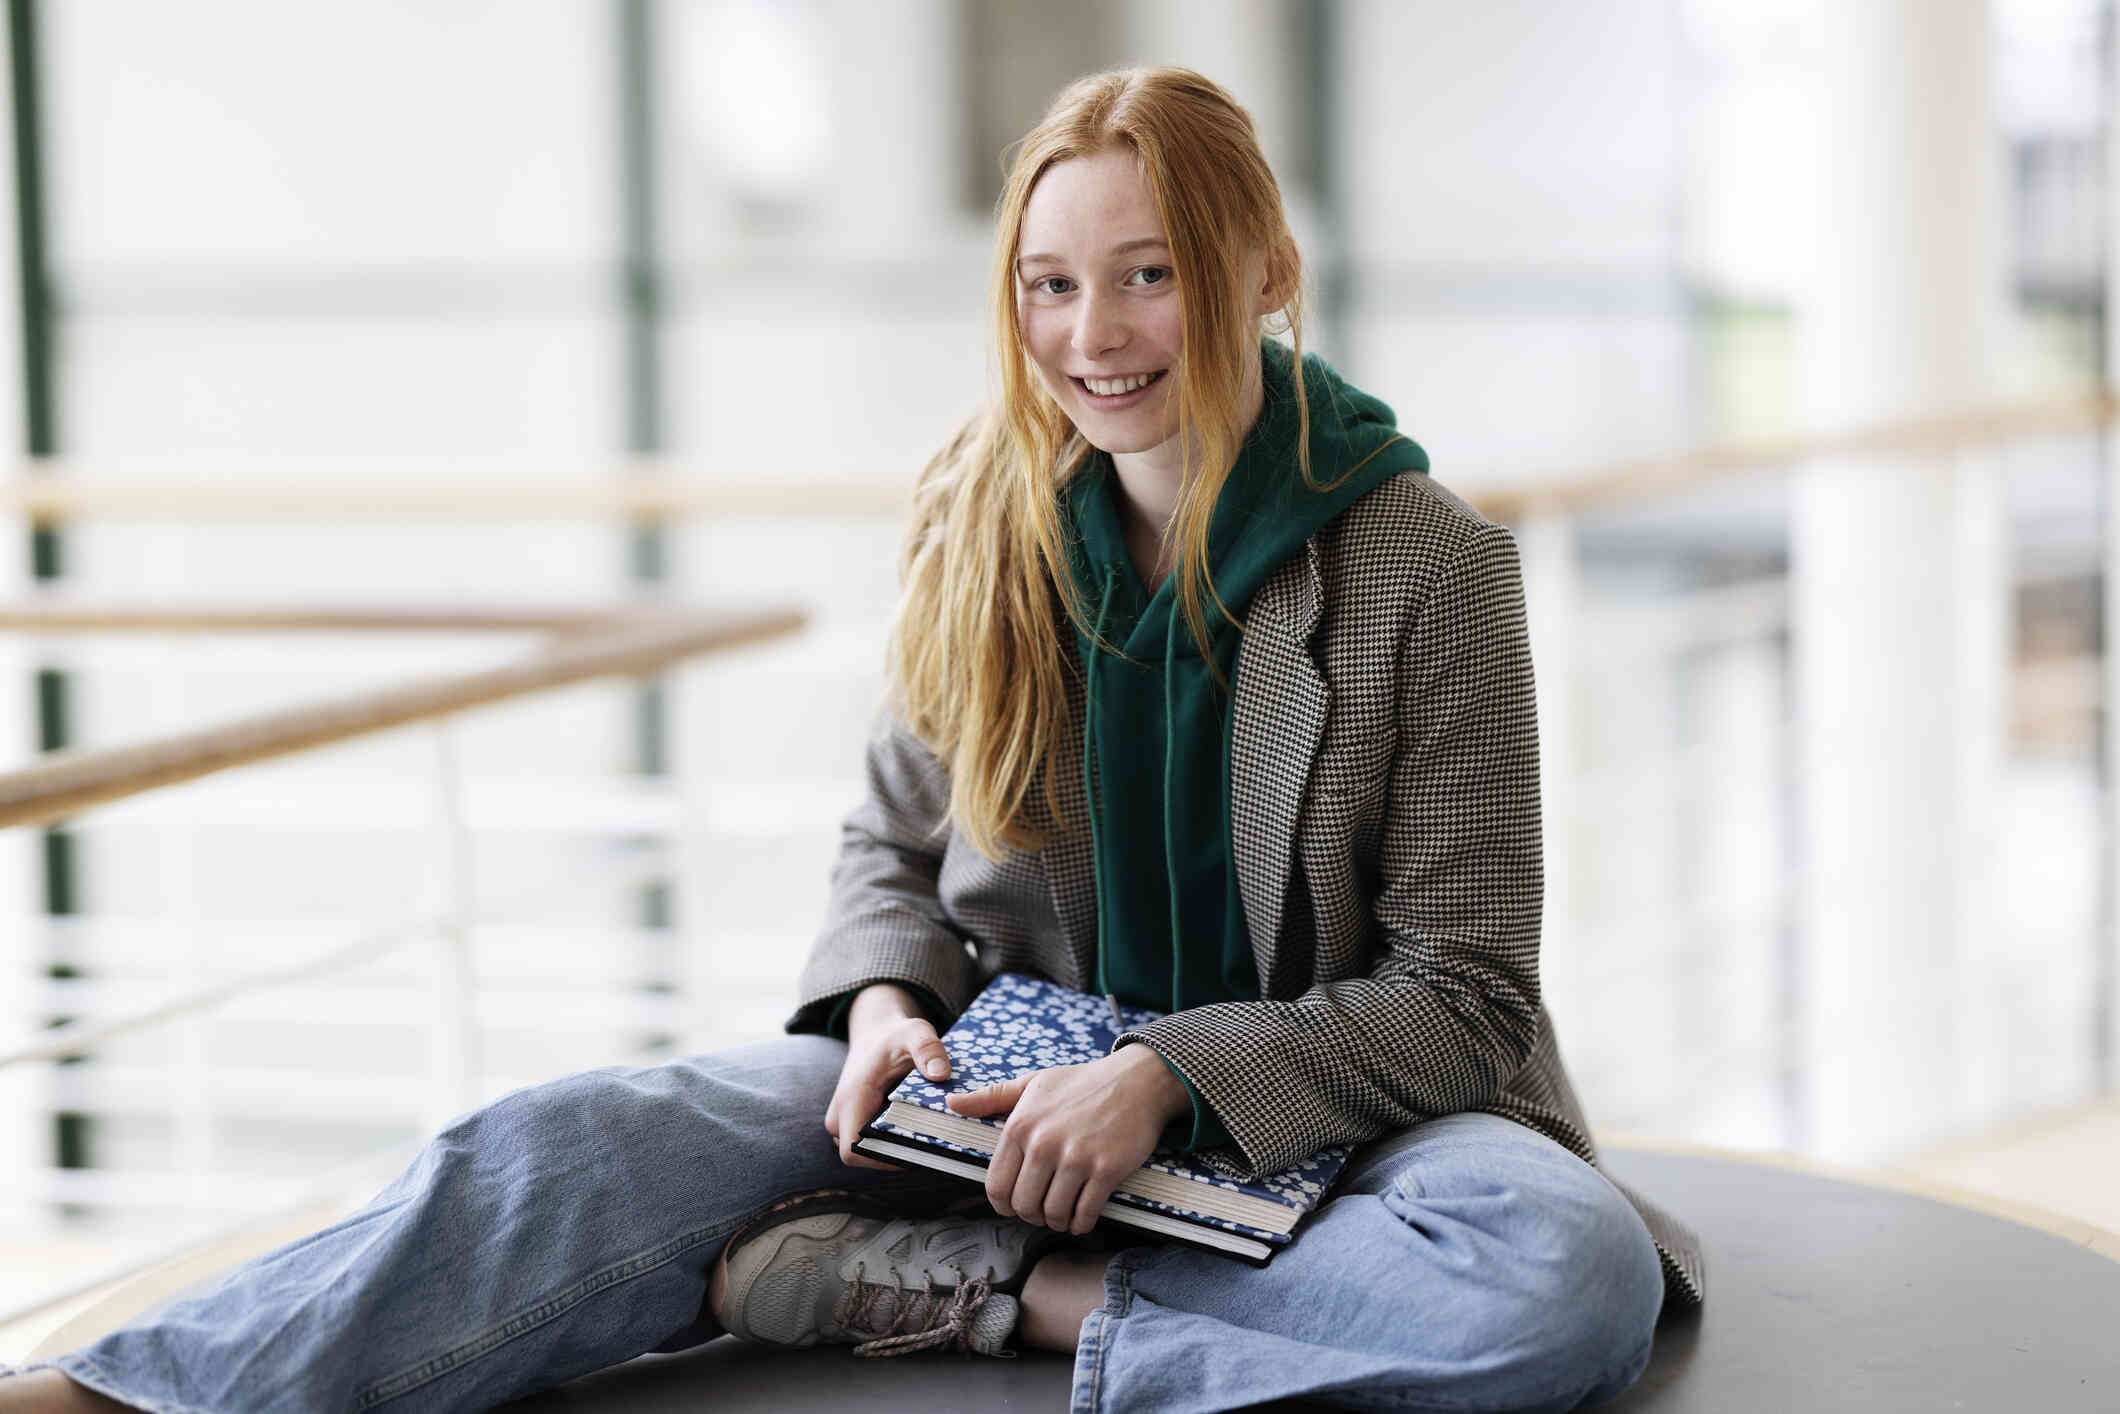 A teen girl in a jackat sits on a table in her school while holding her schoolbooks and smiling at the camera.